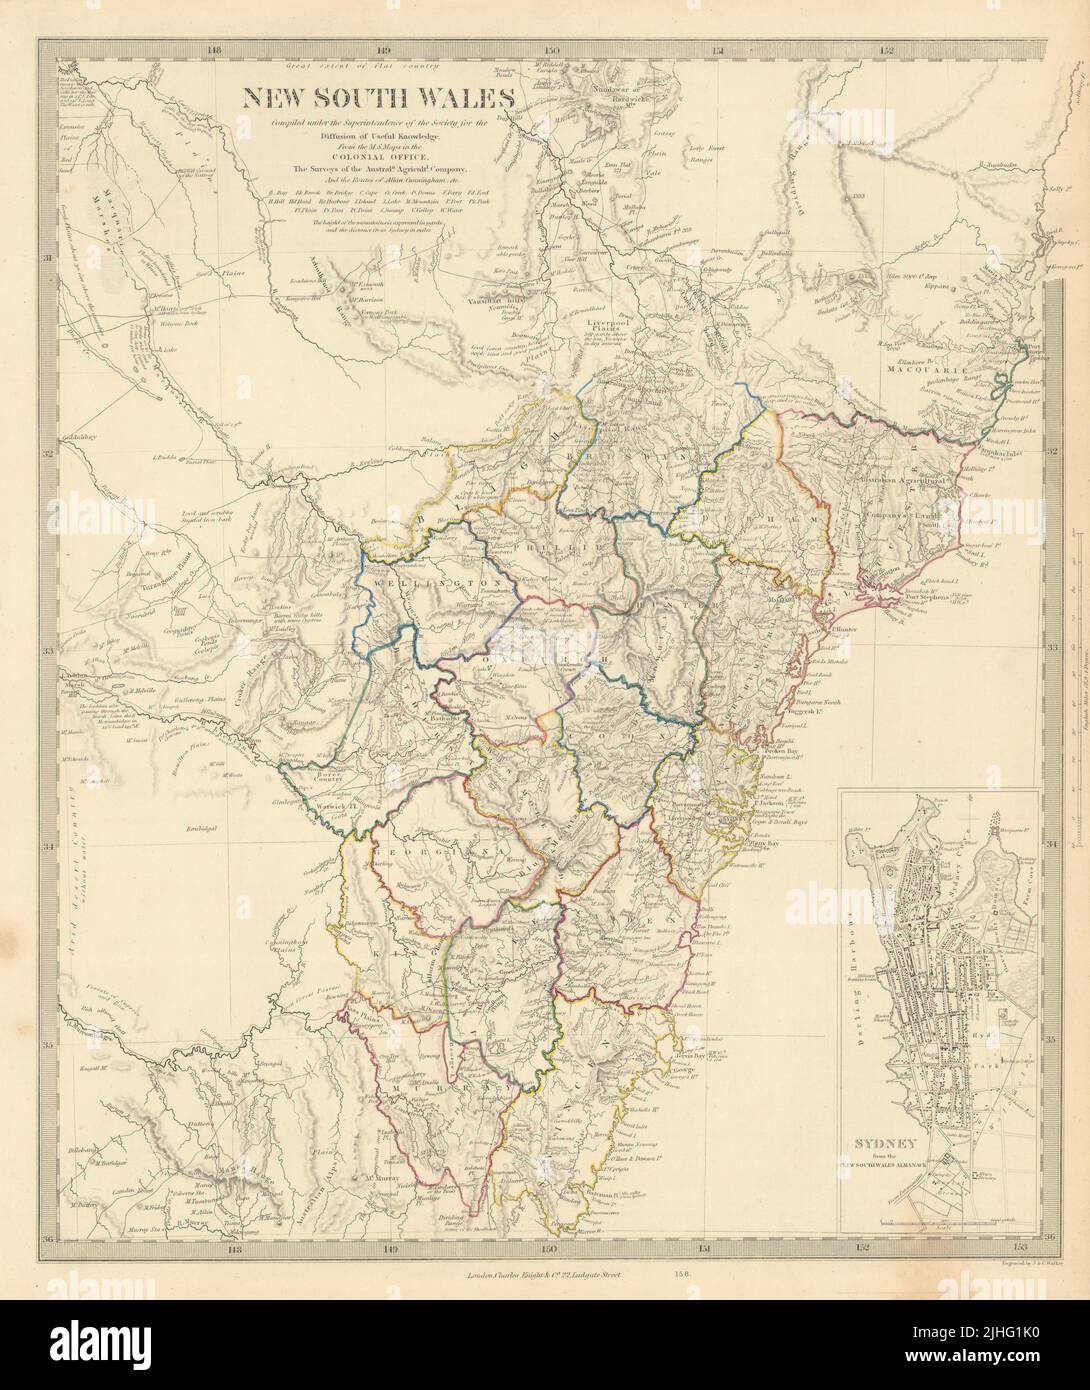 NEW SOUTH WALES based on Cunningham routes. SYDNEY city plan. SDUK 1851 map Stock Photo